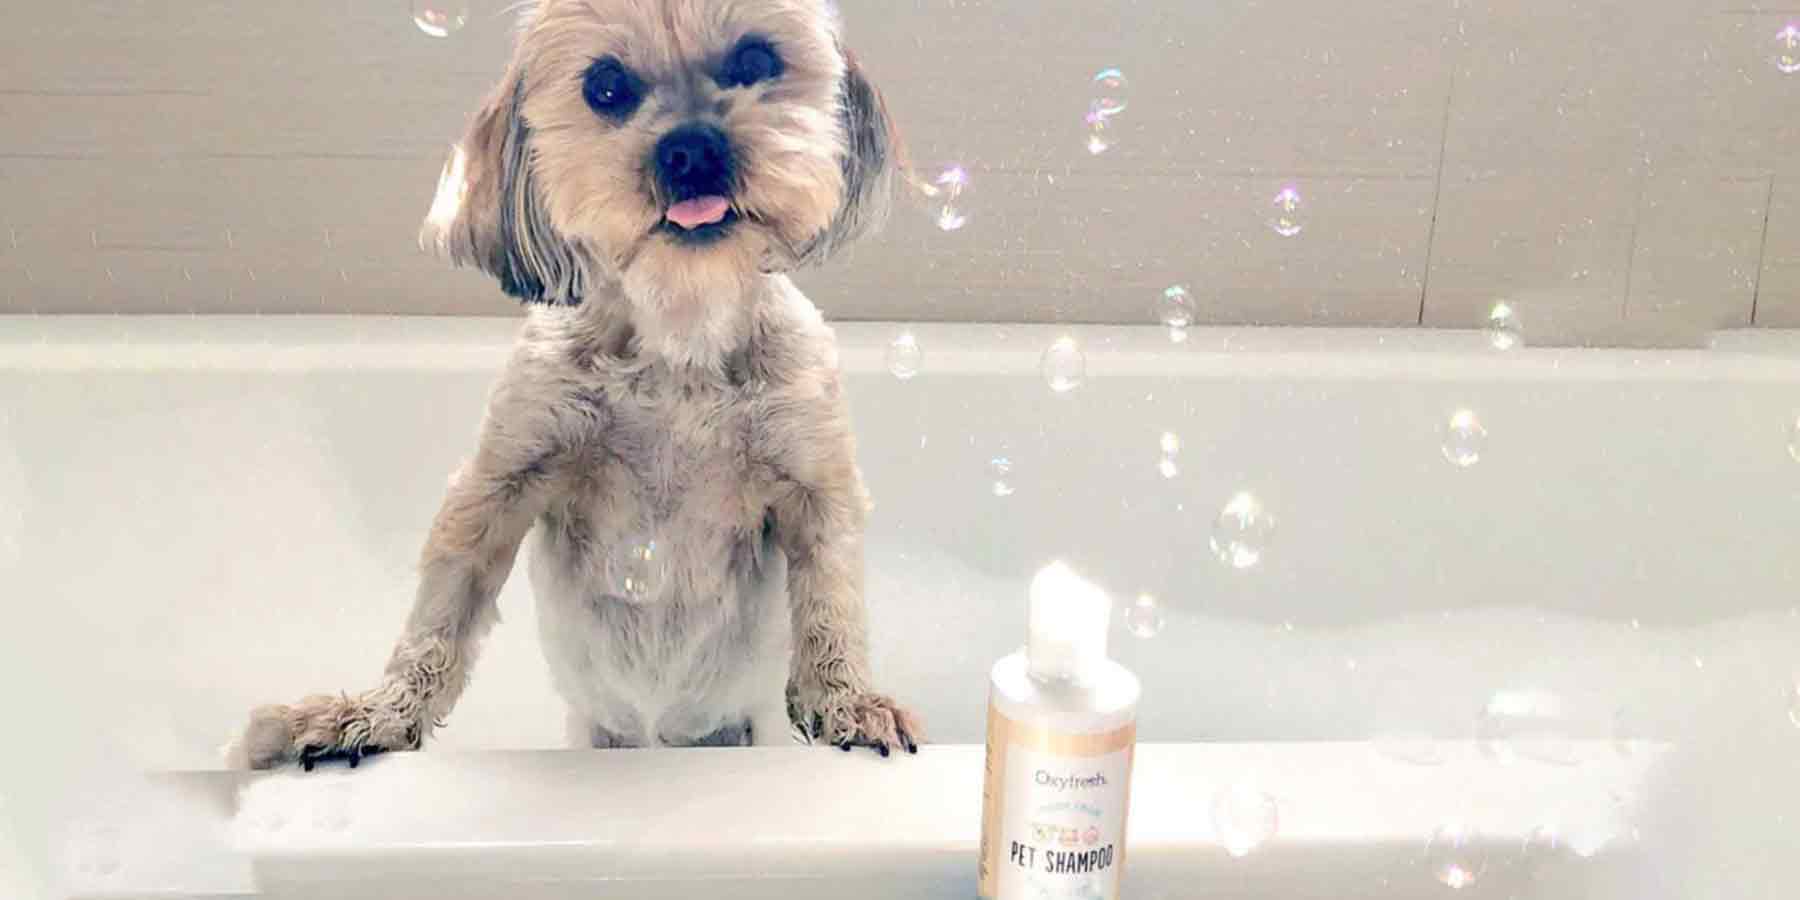 Social-Media-Post-From-Instagram-User-_milatheteddybear-terrier-in-bath-tub-with-scrubby-bubbles-on-her-head-next-to-a-bottle-of-oxyfresh-moisturizing-pet-shampoo-for-dogs-with-dry-skin